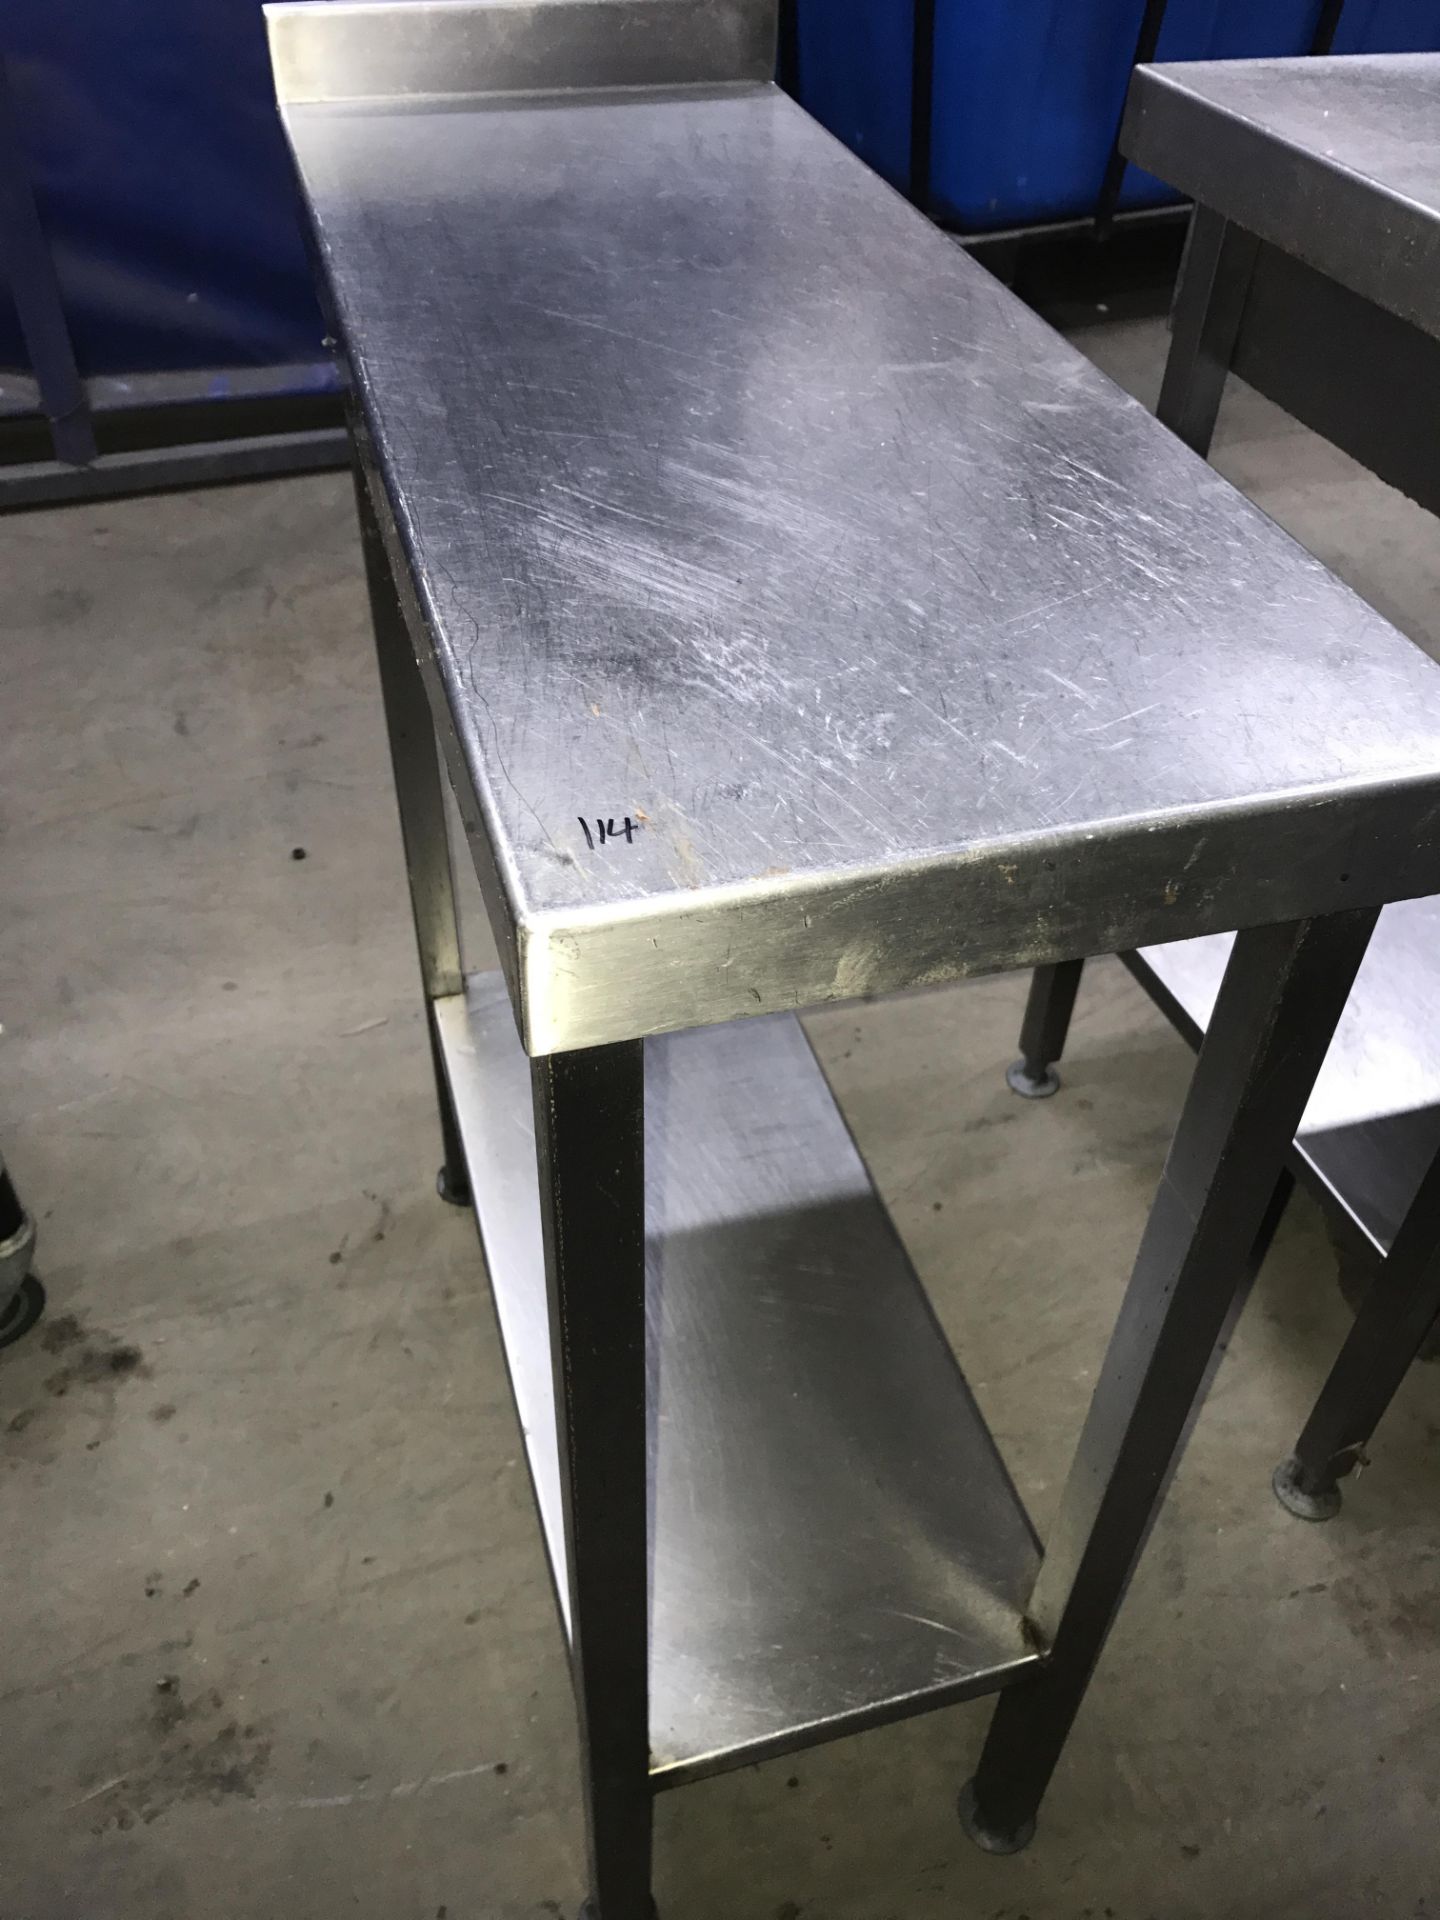 Stainless steel stand 30 x 75 x 85 cm with backsplash and undershelf - Image 2 of 2